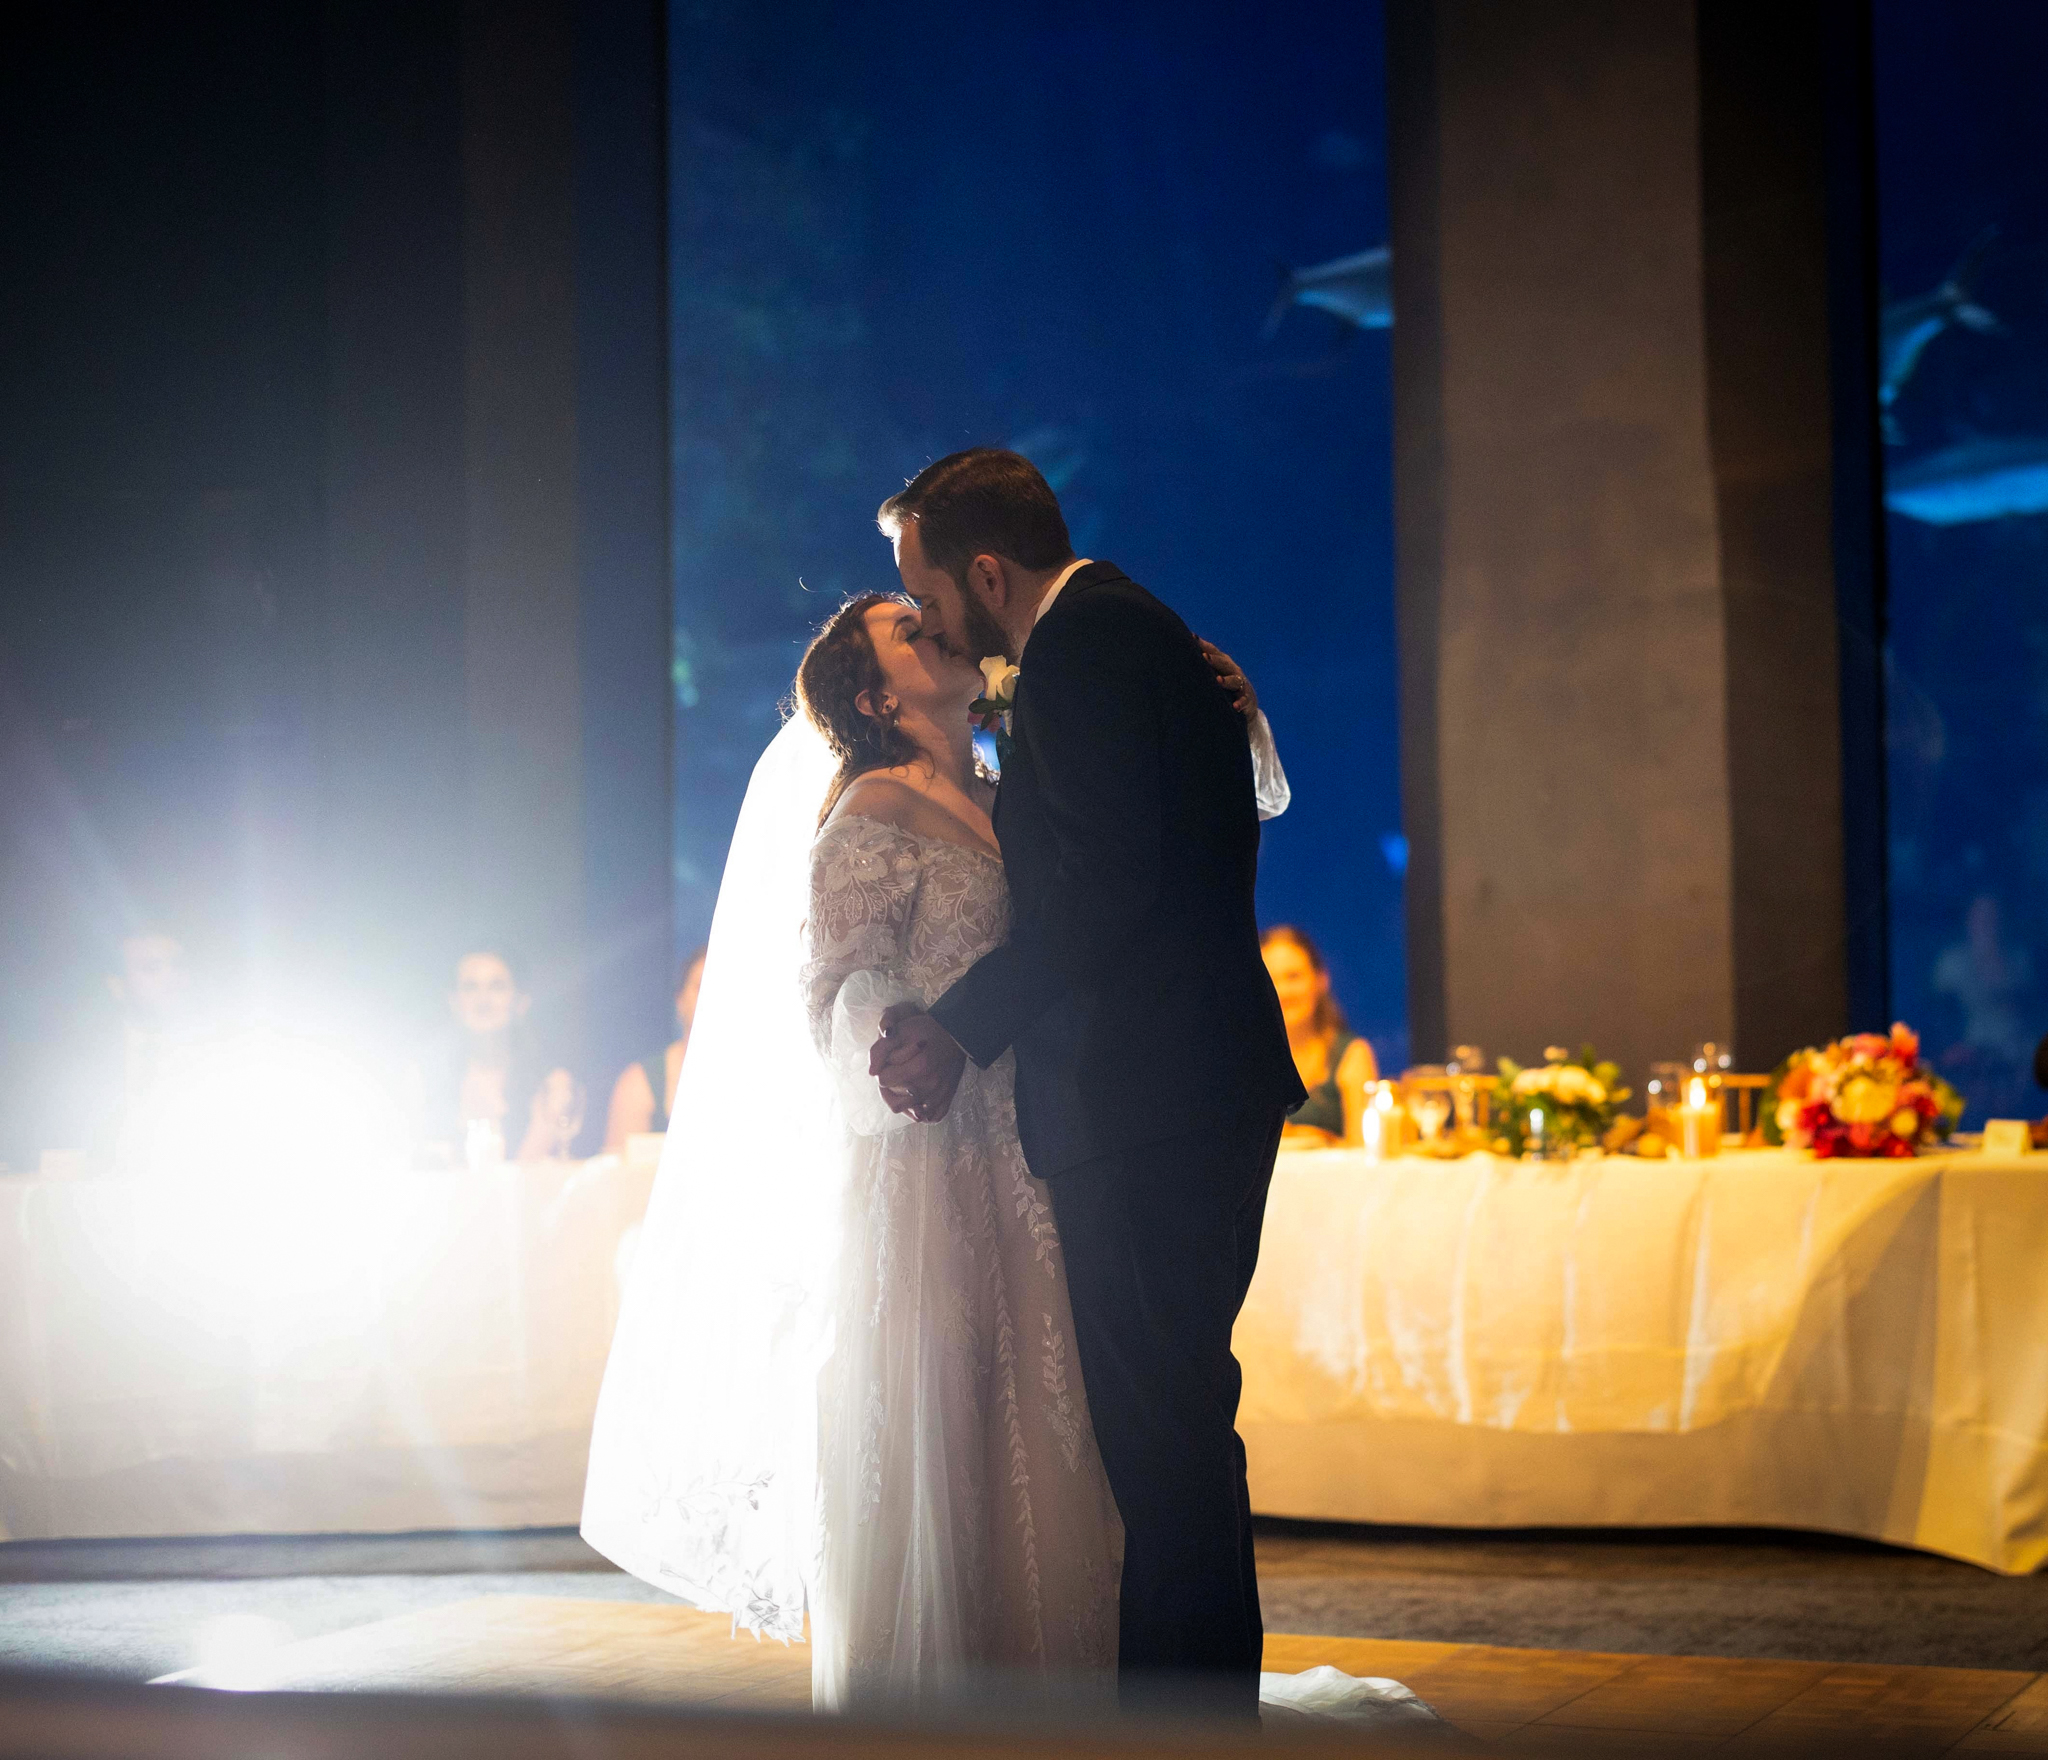 Light Shifter Studios is one of the best aquarium wedding photography teams in the world. 